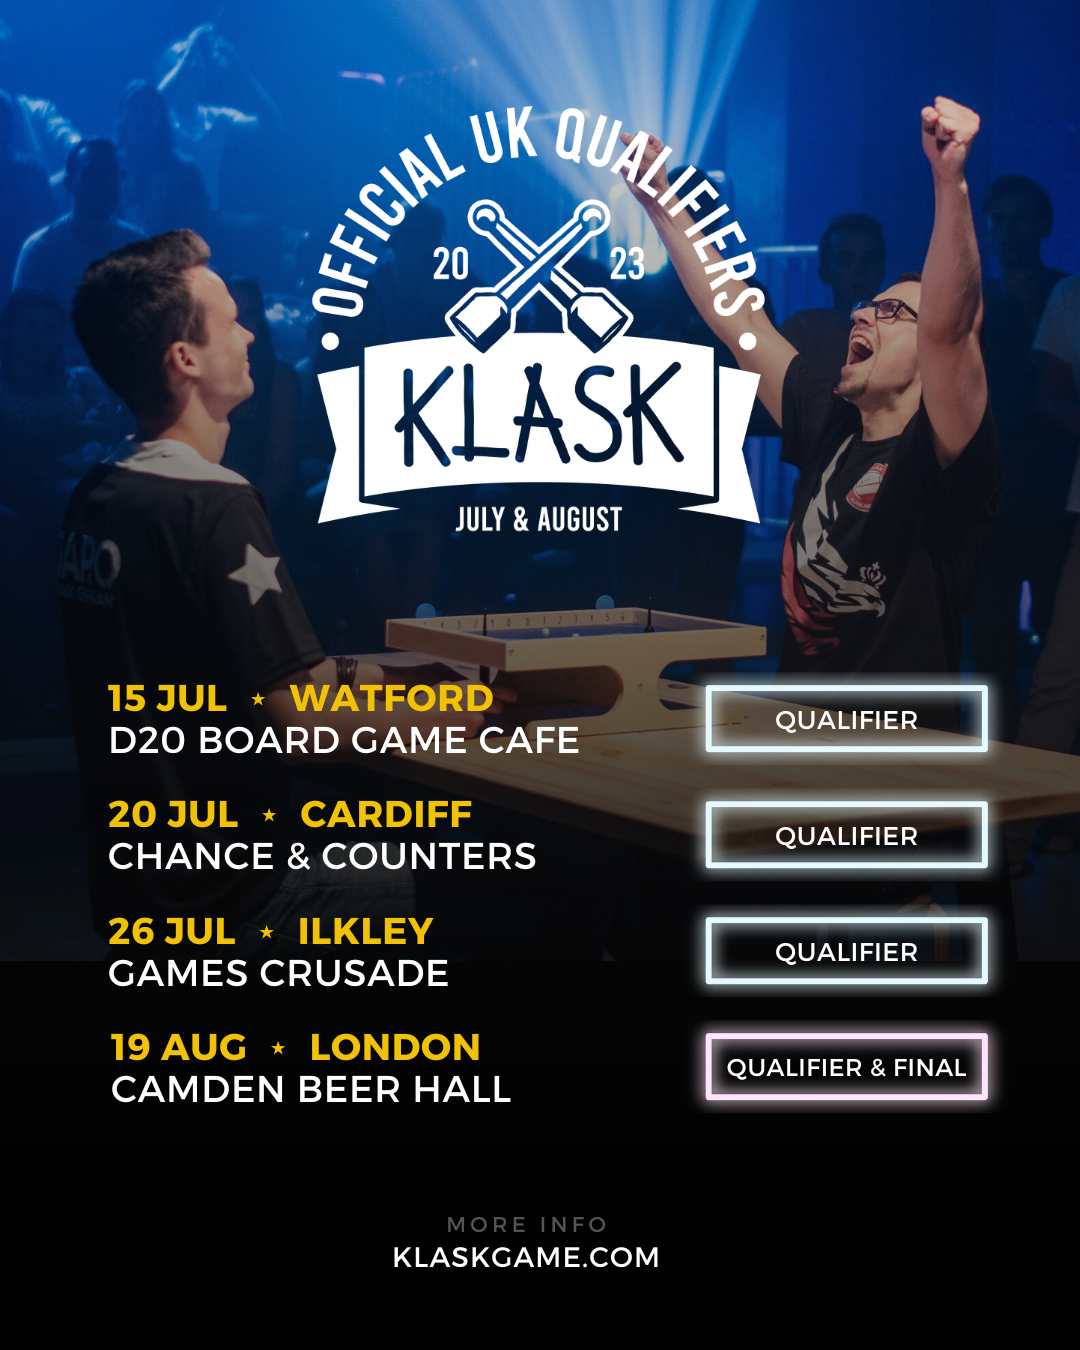 A poster showing the 4 places you can qualify for the UK KLASK Championship. There are 4 events 15th July in Watford, 20th July in Cardiff, 26th July in Ilkley and finally the qualifier and championship on 19th August in London